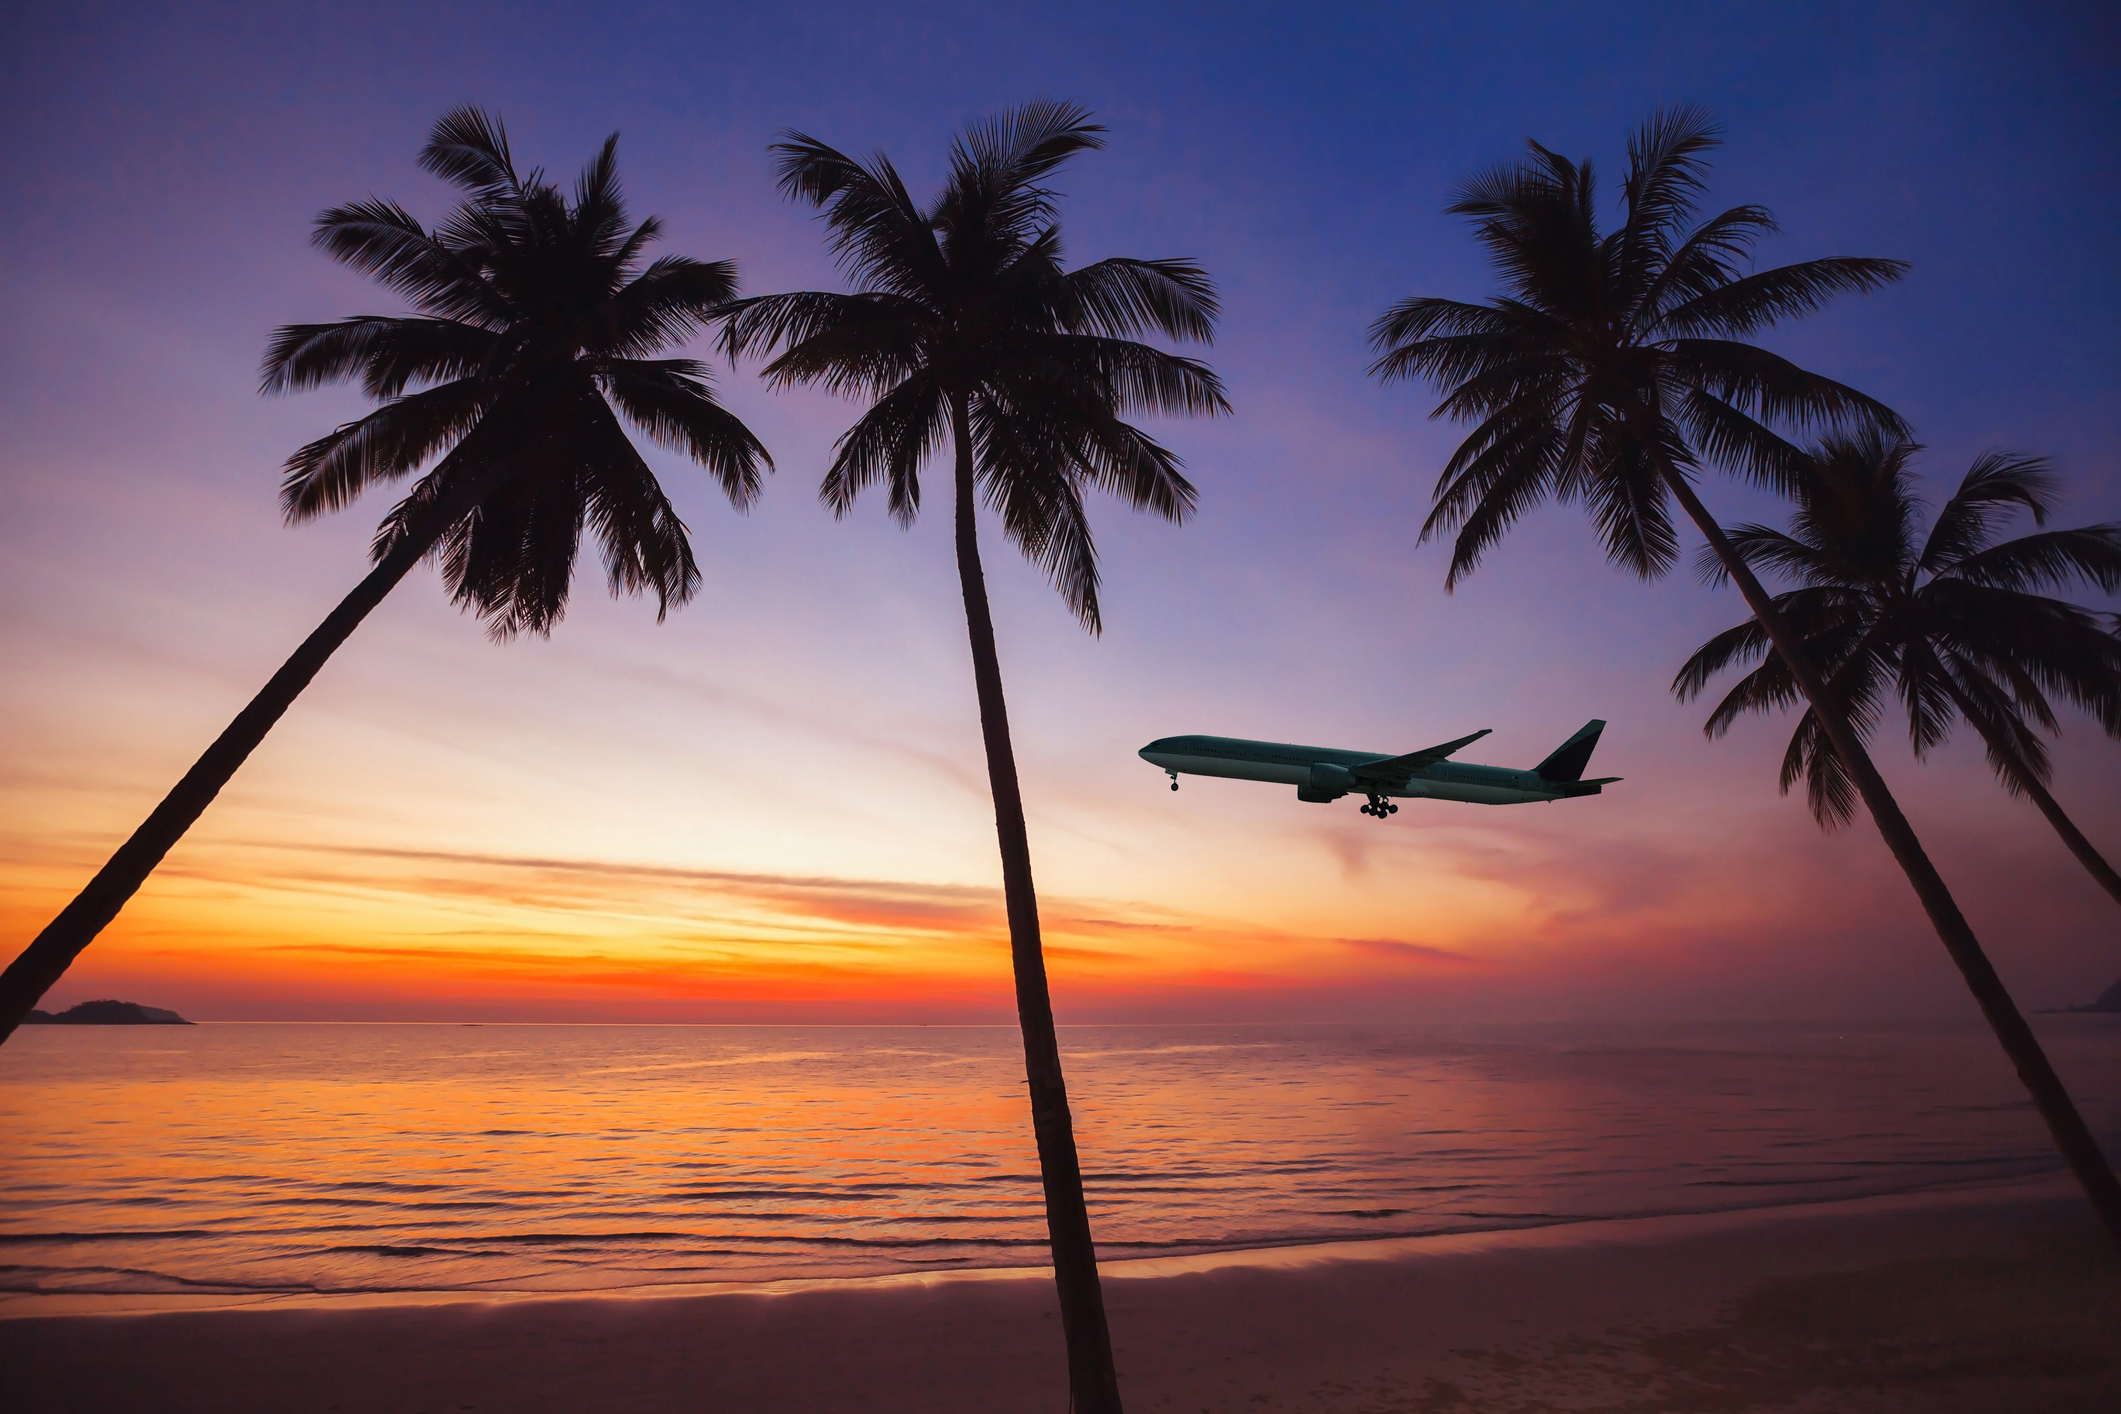 The silhouette of a plane and palm trees against a sunset.